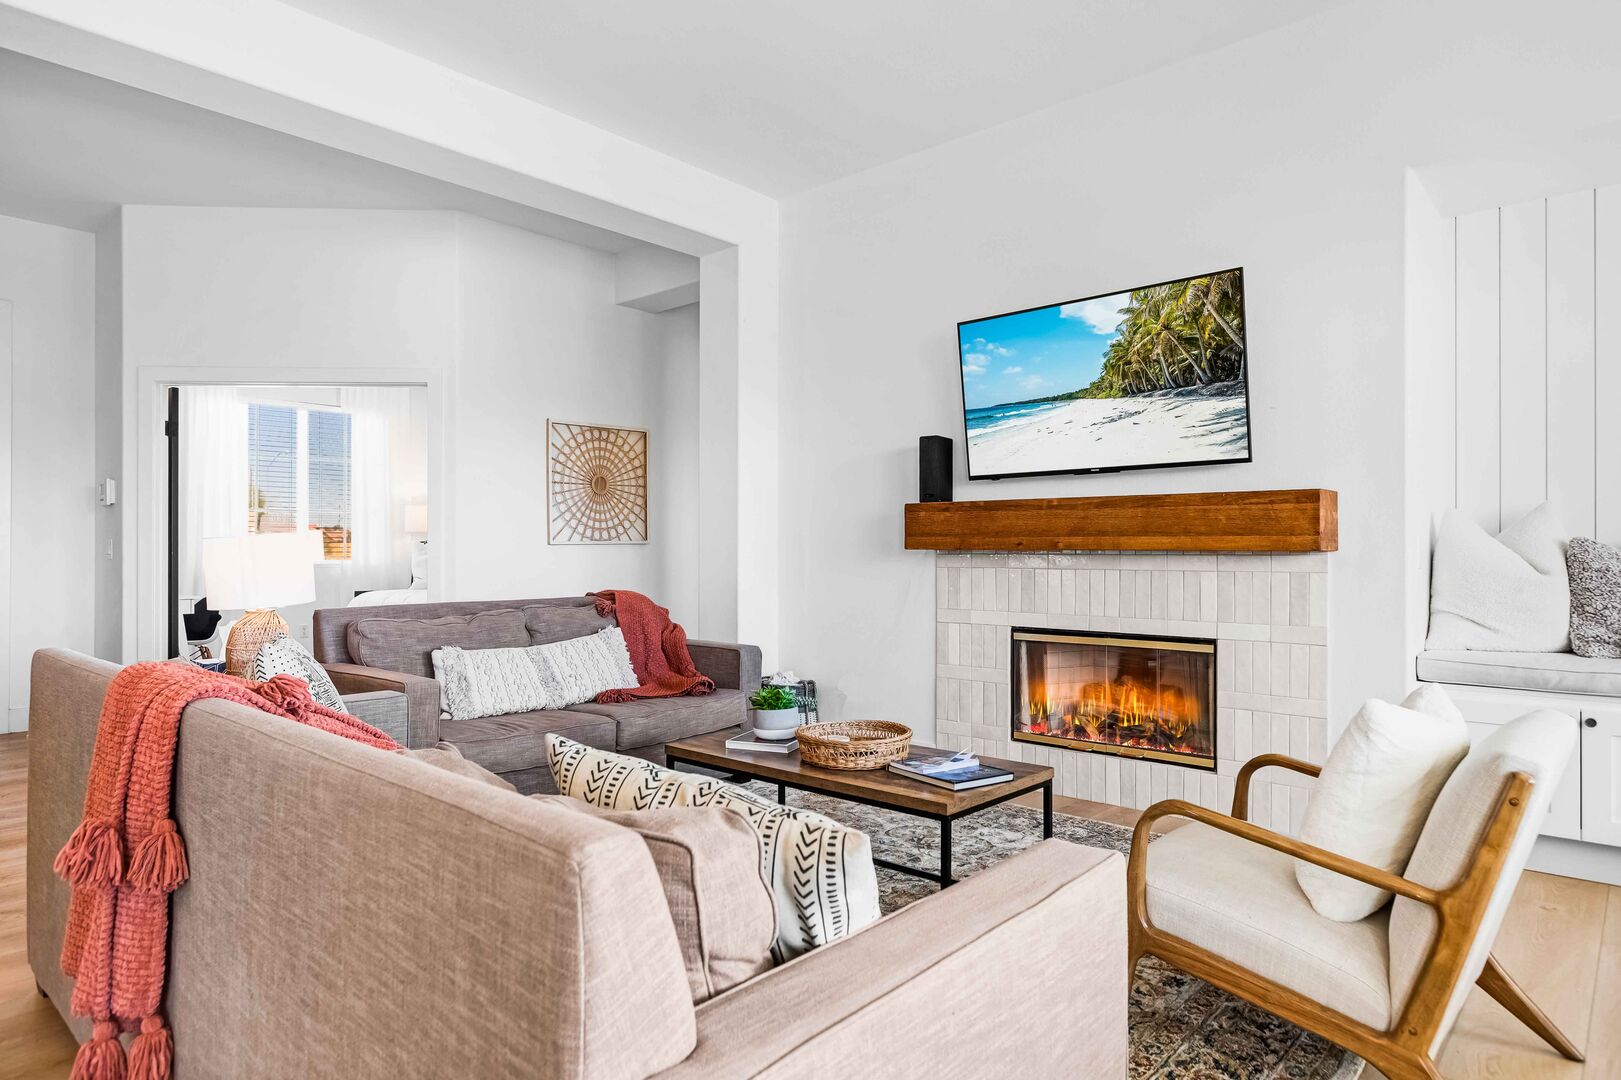 There is plenty of room in the living room to lounge in front of a 55-inch Toshiba Smart television and natural gas fireplace with comfort.